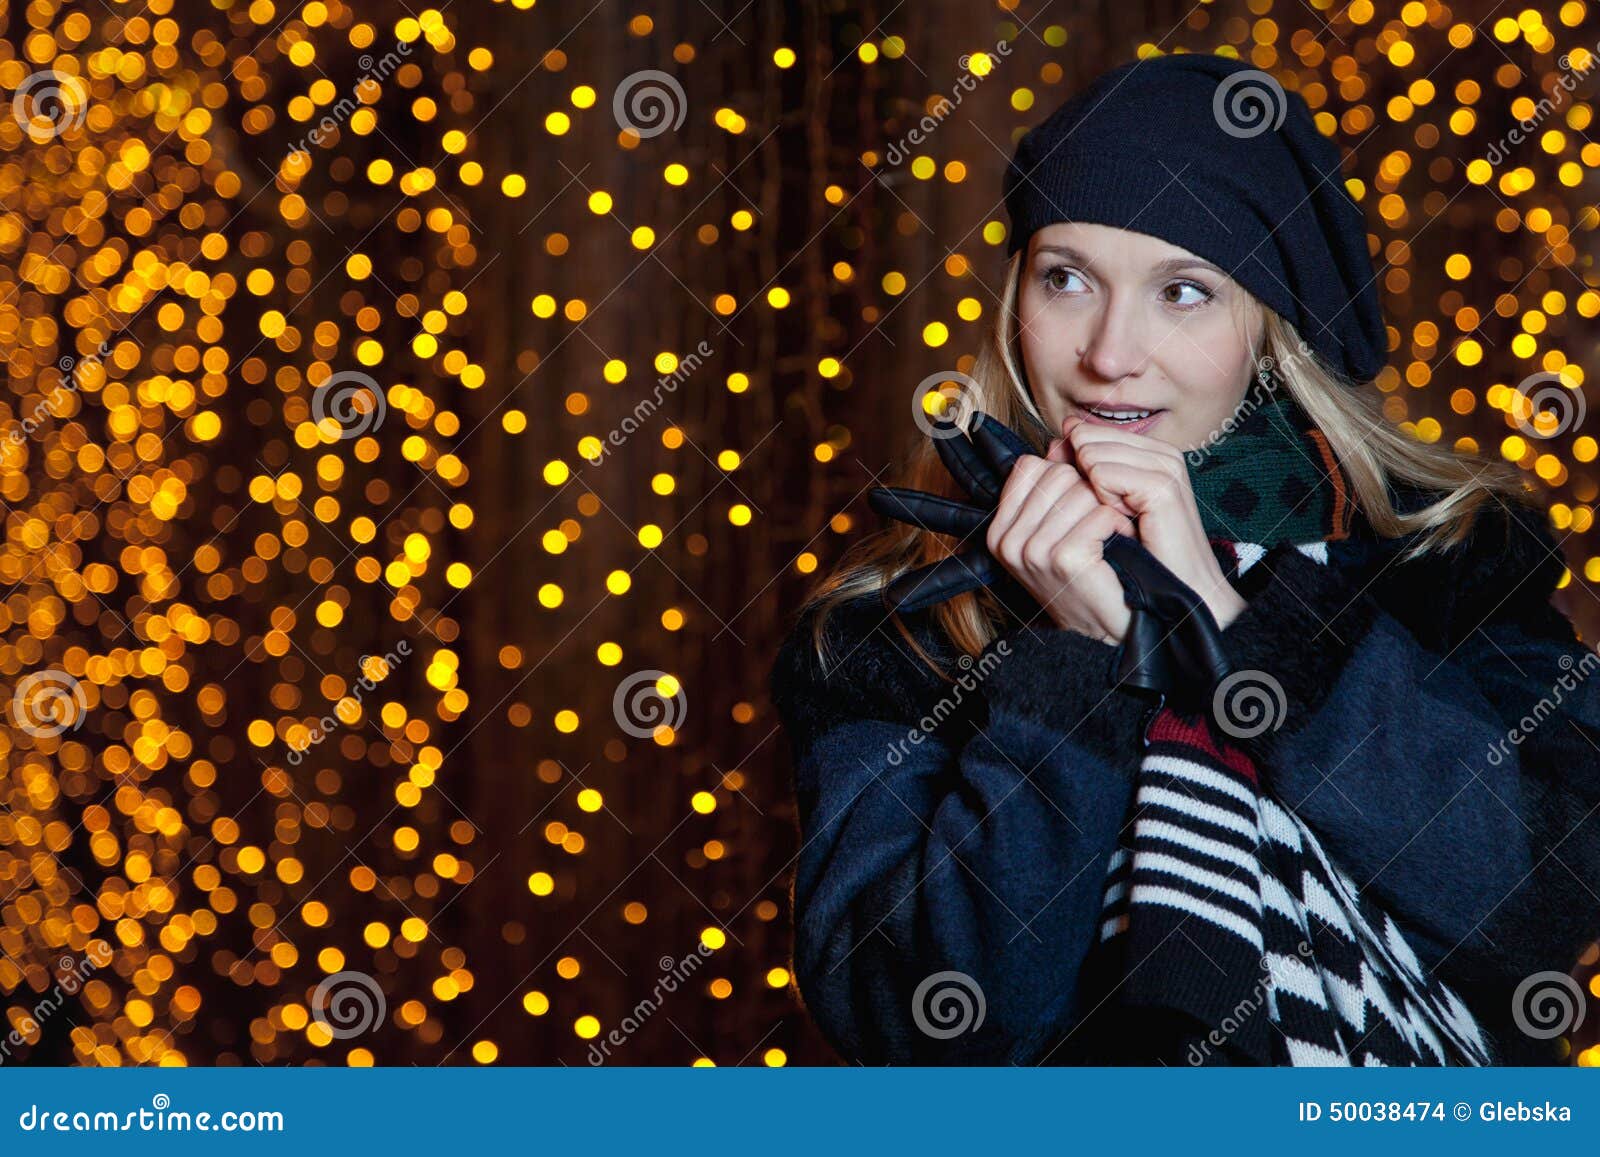 Beautiful Blonde Girl on Blurred Background of Yellow Lights Stock ...